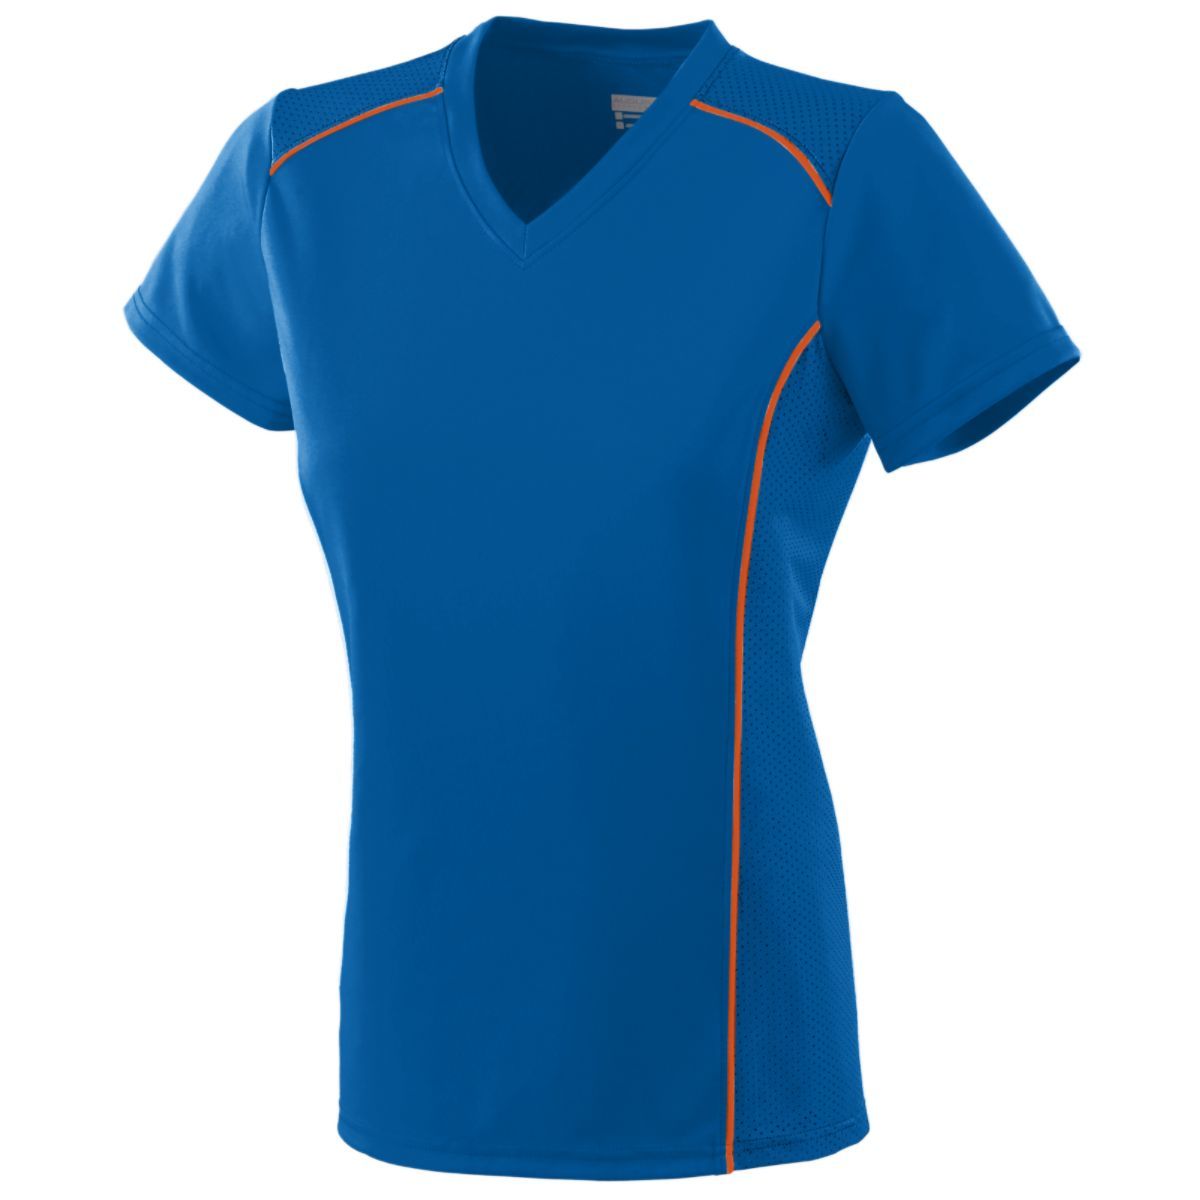 Augusta Sportswear Girls Winning Streak Jersey in Royal/Orange  -Part of the Girls, Augusta-Products, Soccer, Girls-Jersey, Shirts, All-Sports-1 product lines at KanaleyCreations.com